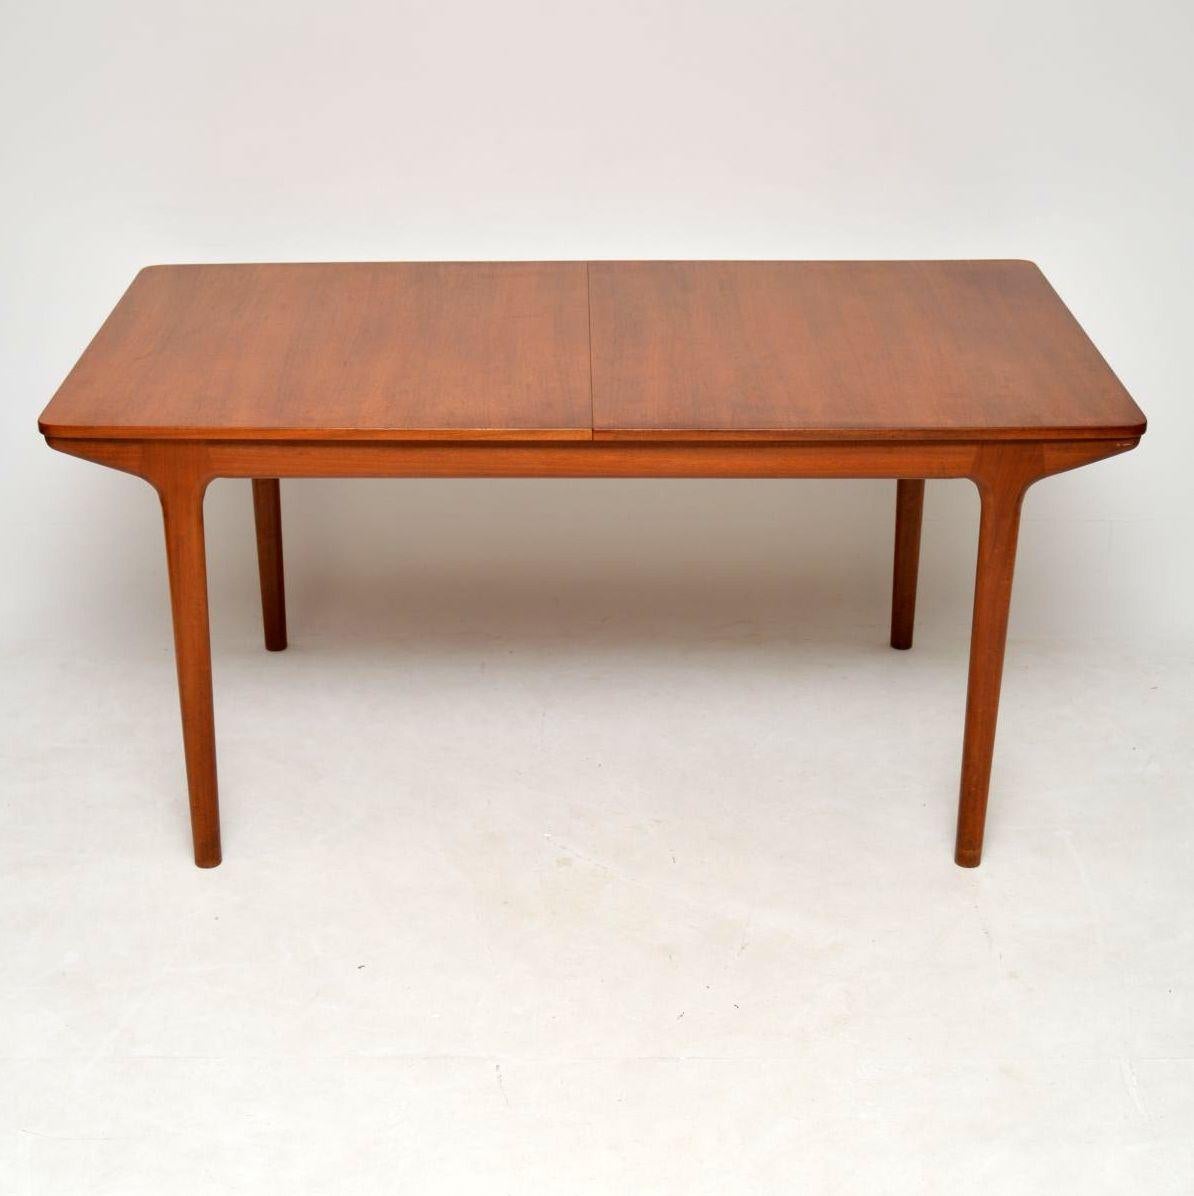 A top quality vintage extending dining table in teak, this was made by McIntosh, it dates from the 1960s. It’s in good condition for its age, with a lovely even colour throughout, and no major damage. There is just some minor wear to the polish and